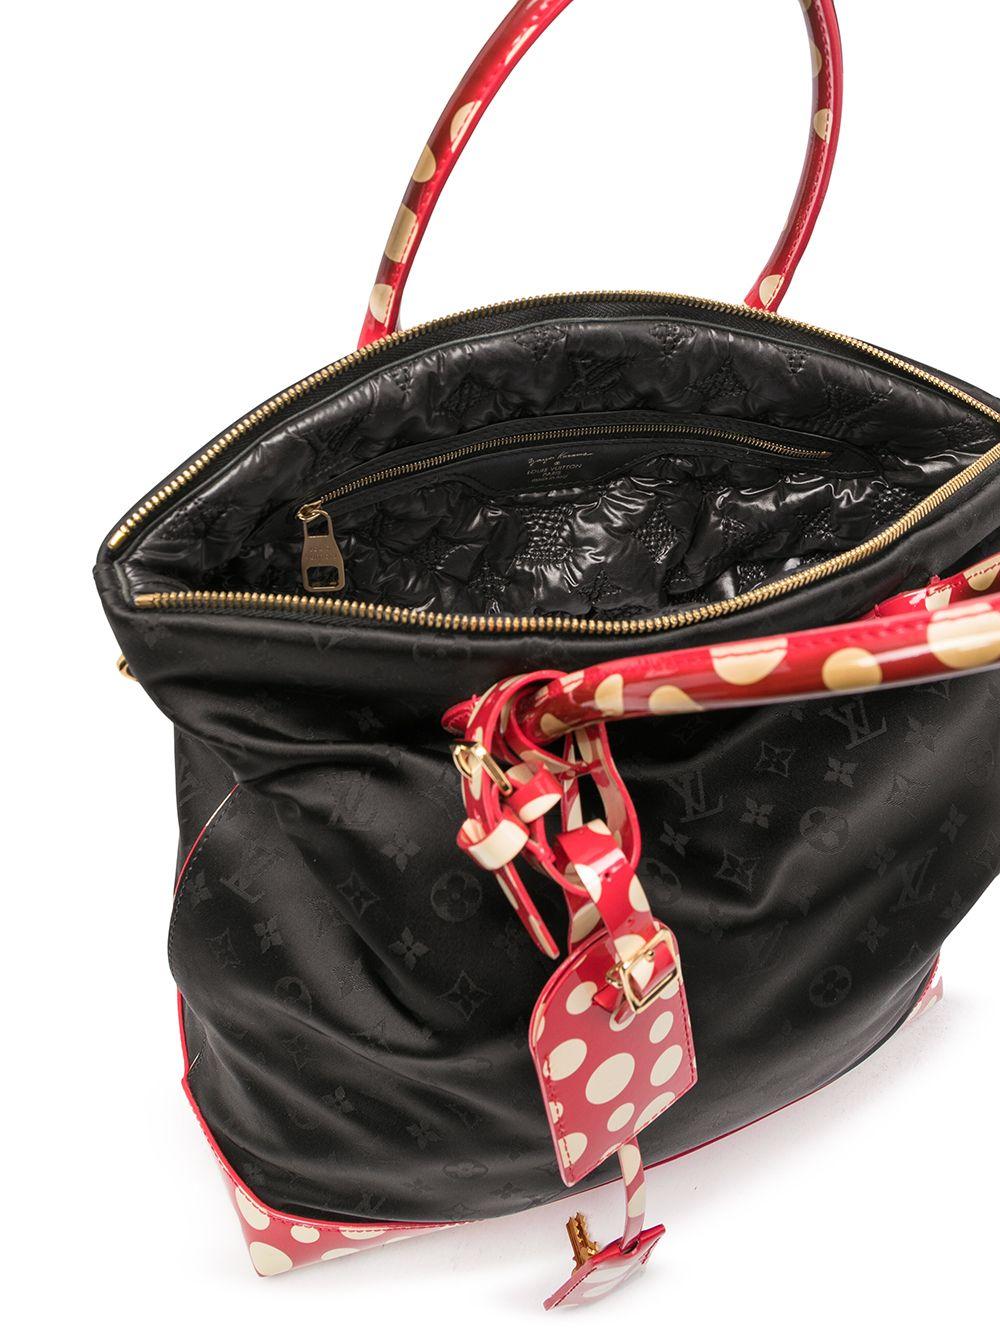 From the iconic collaboration with Yayoi Kusama in 2012. This pre-owned Louis Vuitton Lockit bag has been crafted from their classic monogram print in black nylon and styled with signature infinity dots on red vernis leather. Featuring two top